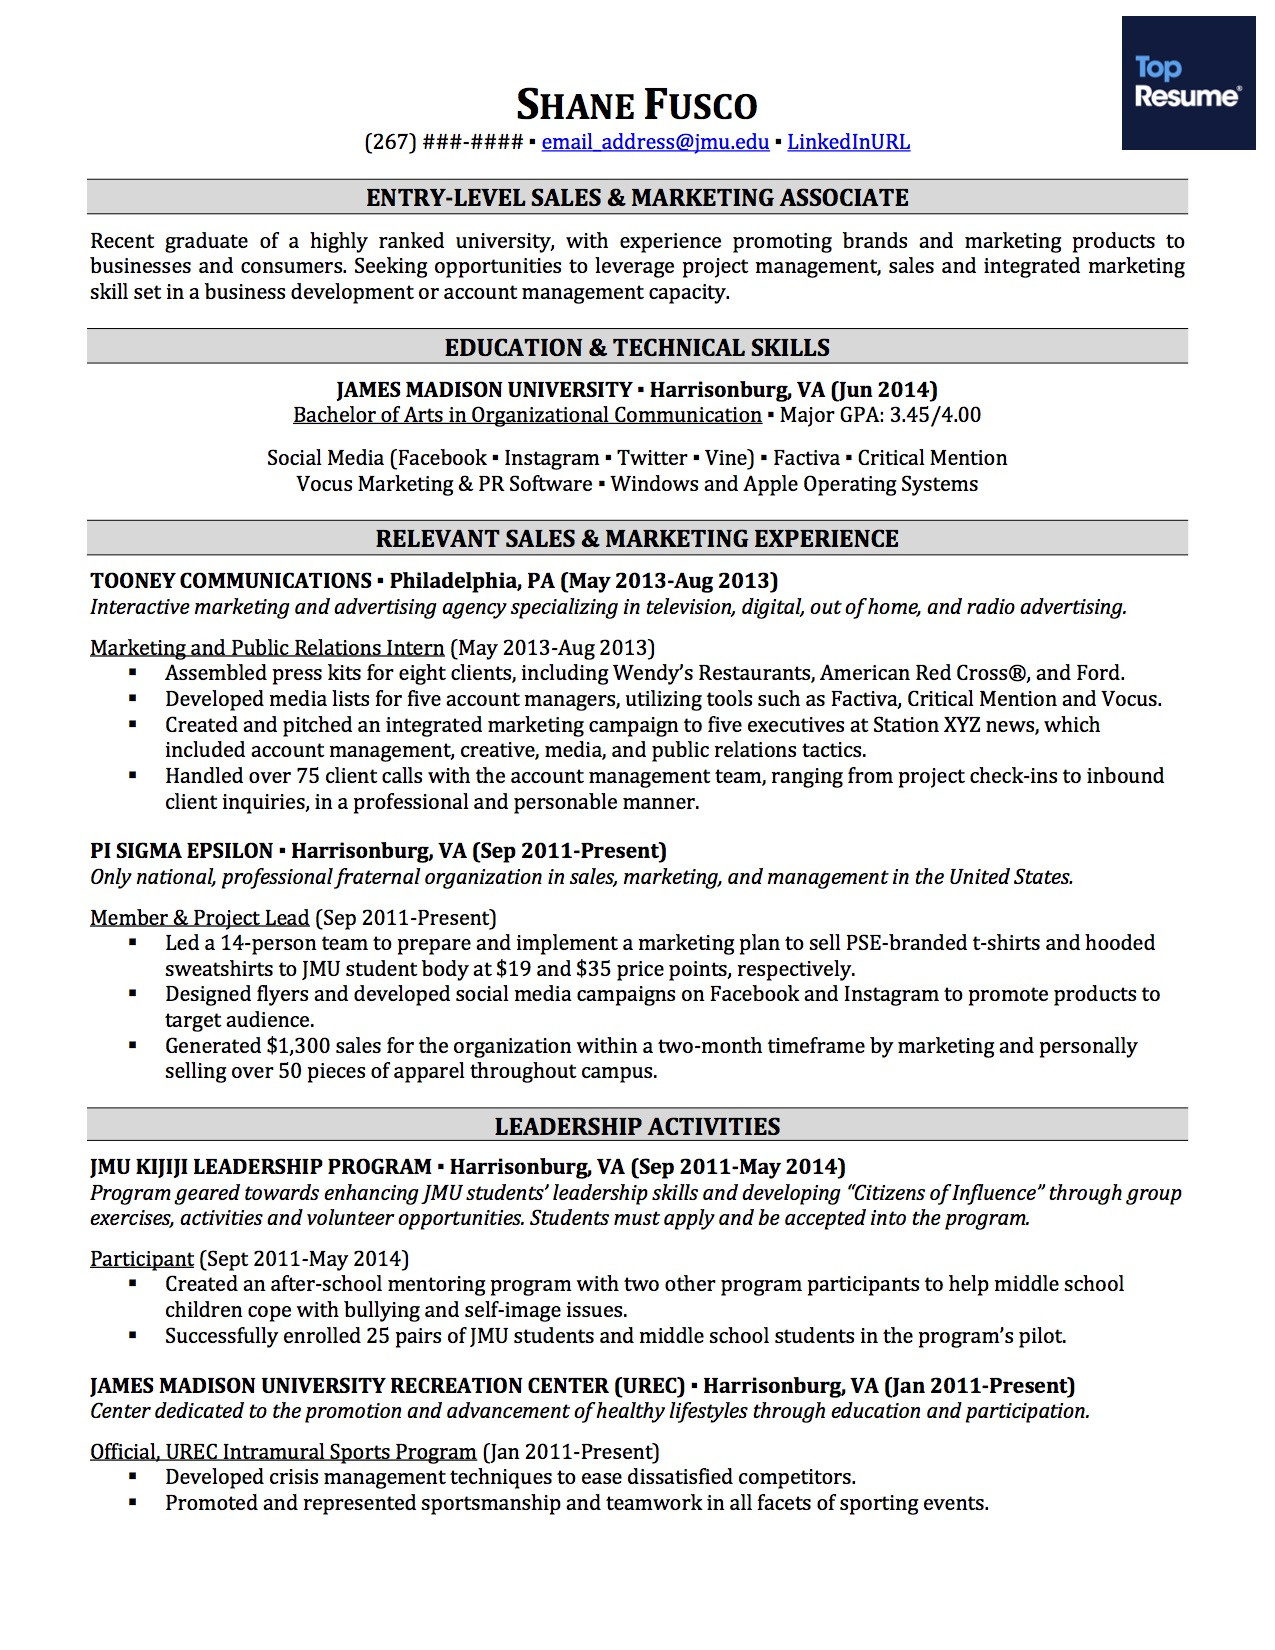 Sample Resume for No Experience Recent Grads How to Make A Great Resume with No Experience topresume